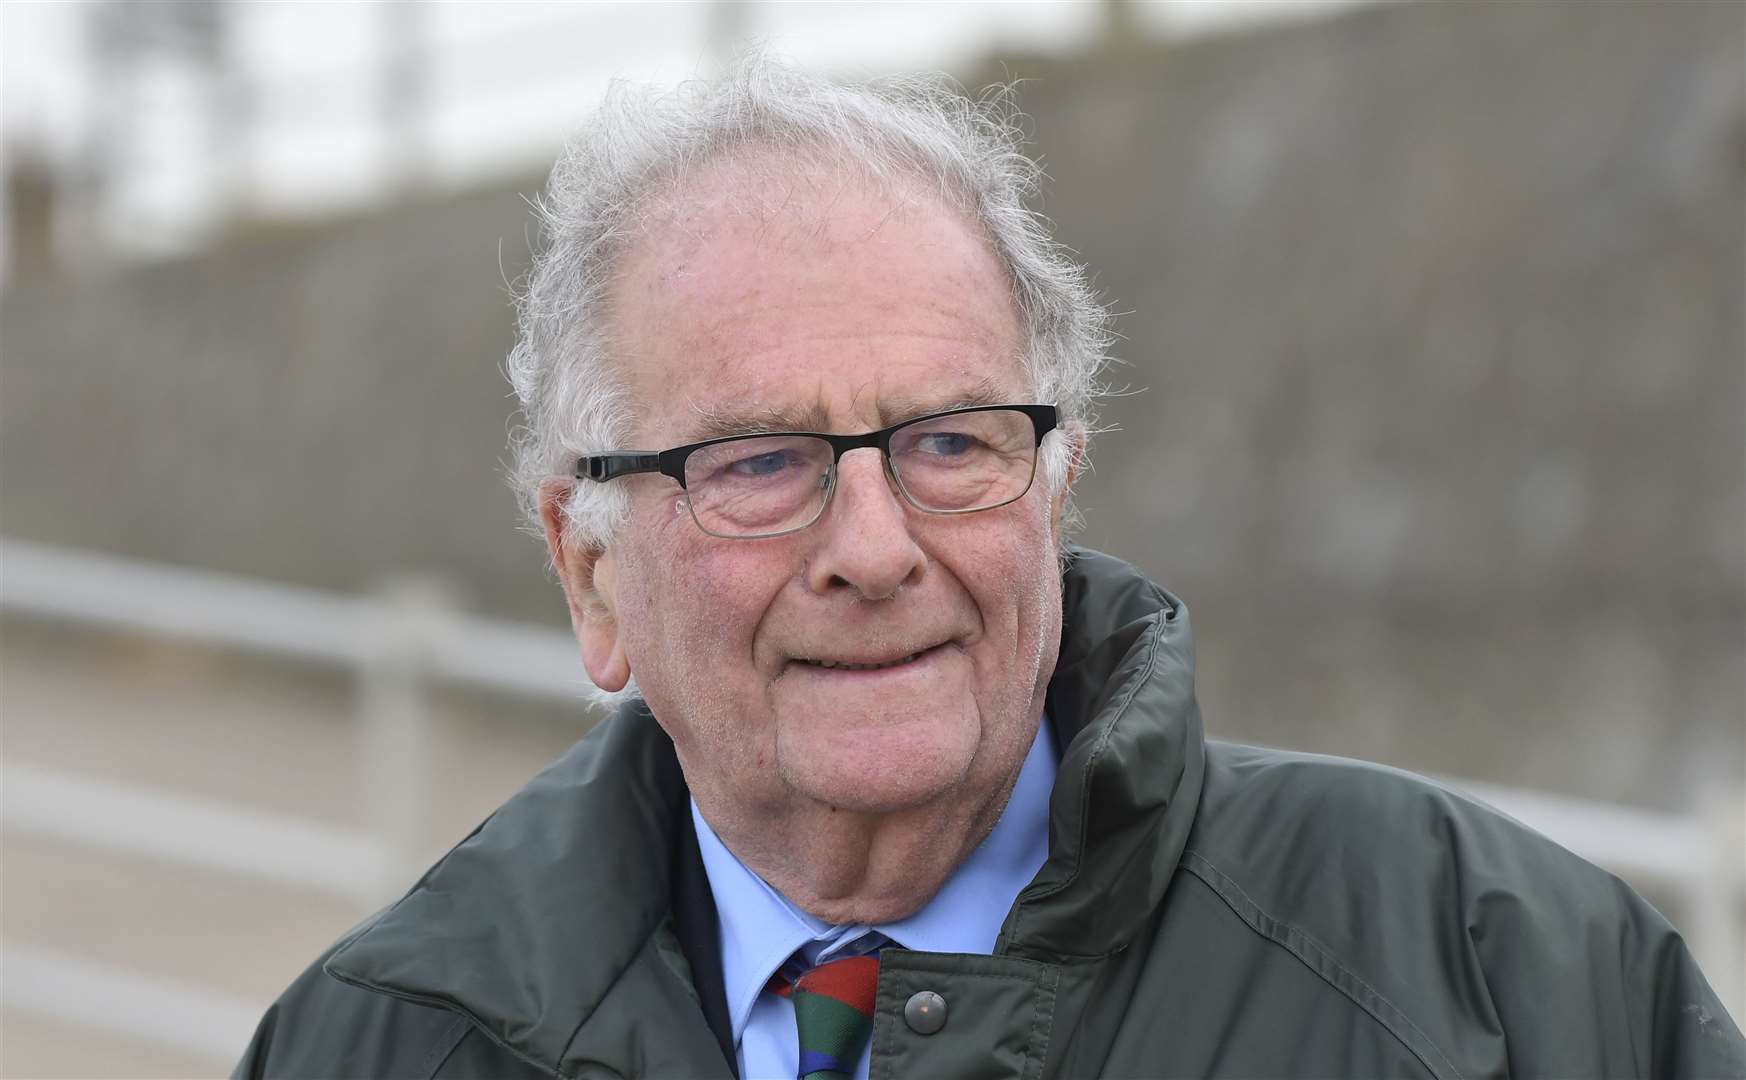 Thanet North MP Sir Roger Gale says it's time Boris Johnson goes. Picture: Tony Flashman